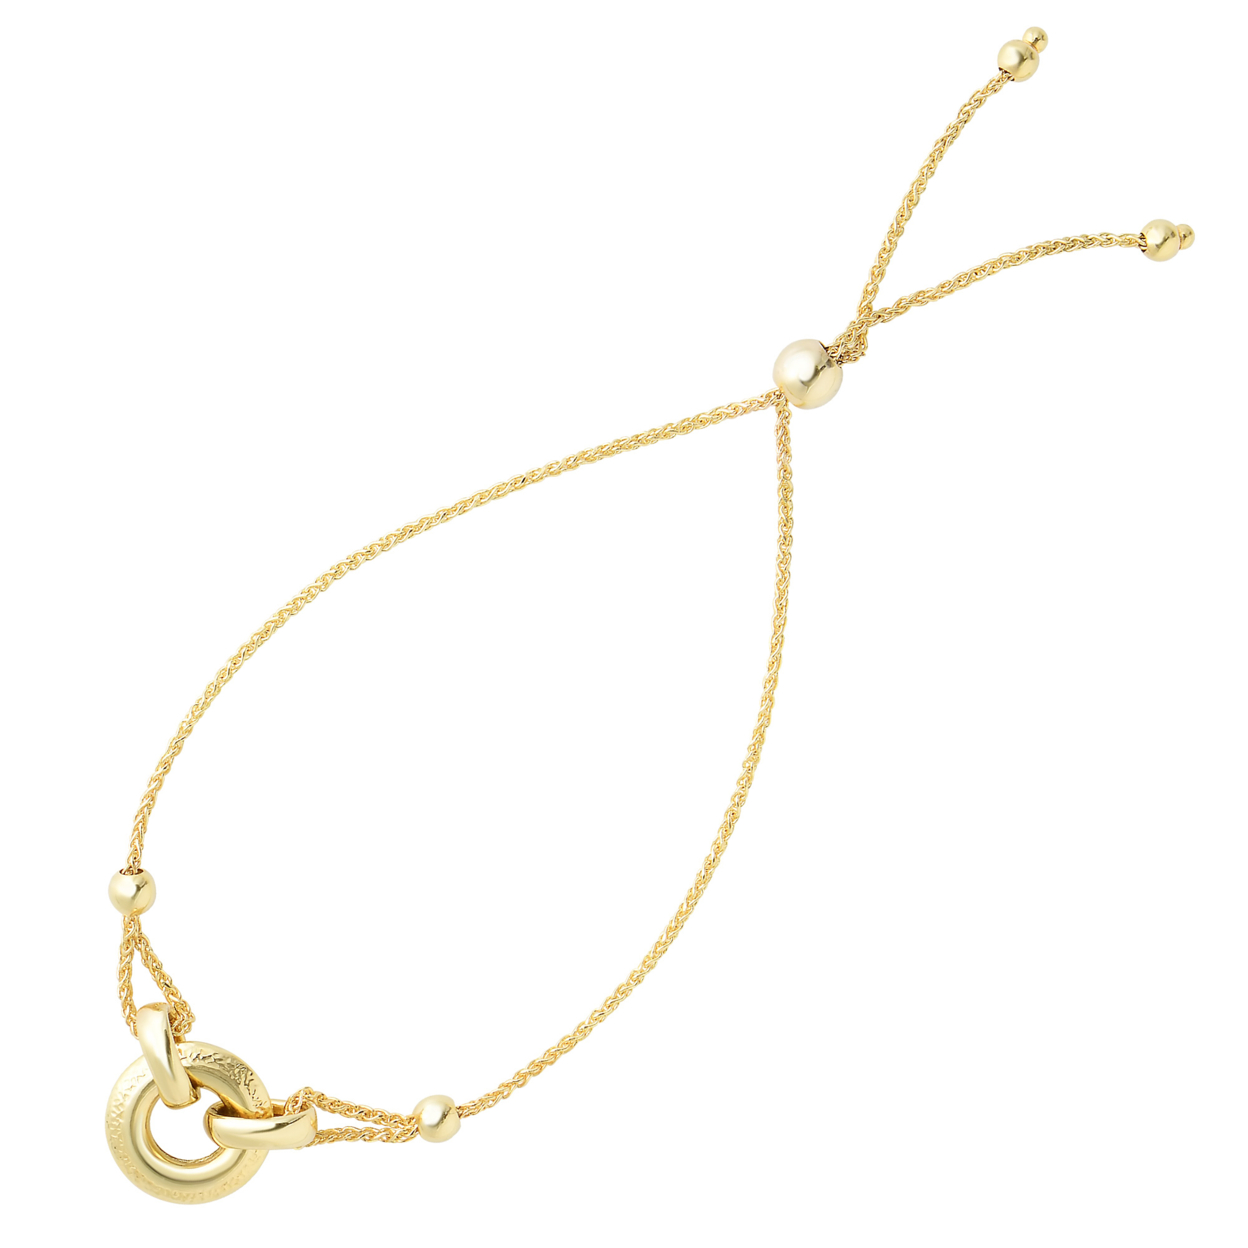 JewelryAffairs Ring Anchored To Loop Center Bolo Friendship Adjustable Bracelet In 14K Yellow Gold, 9.25"